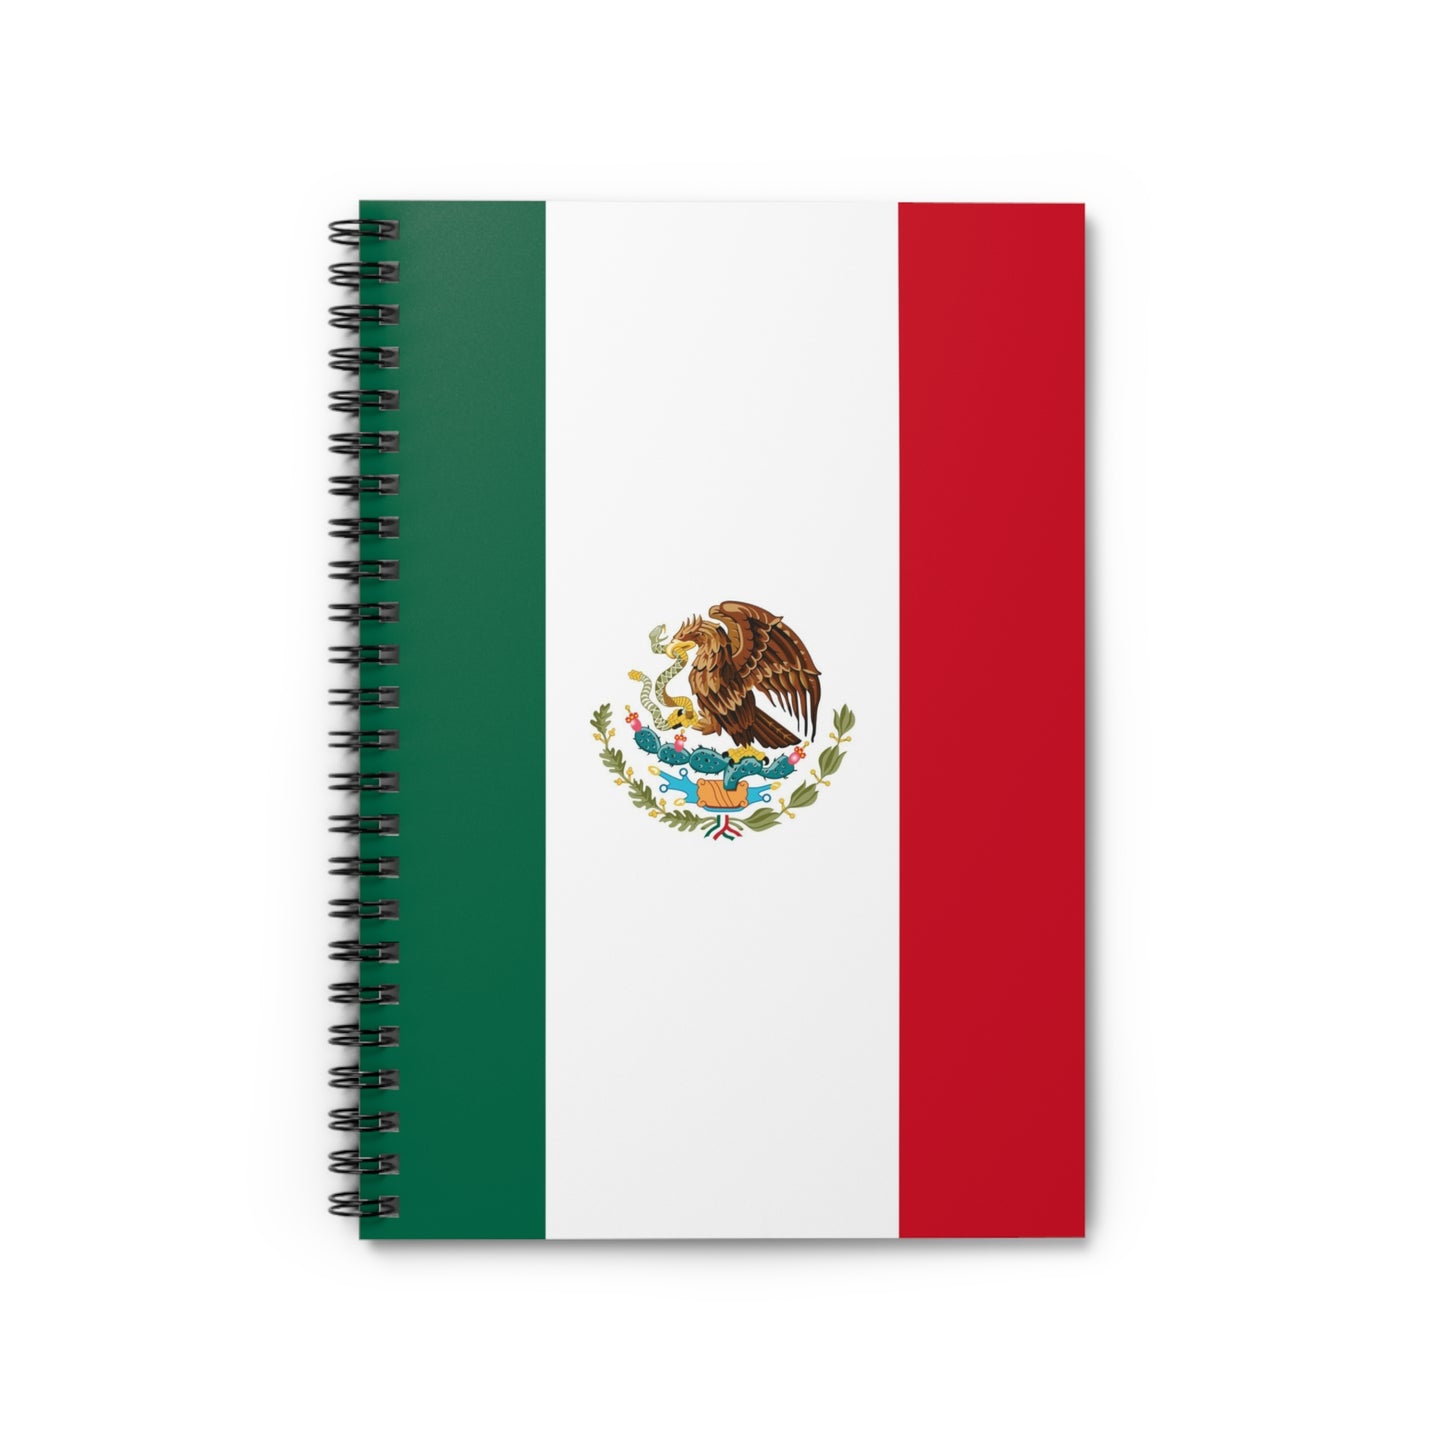 Mexican Flag, Spiral Notebook, Ruled Line